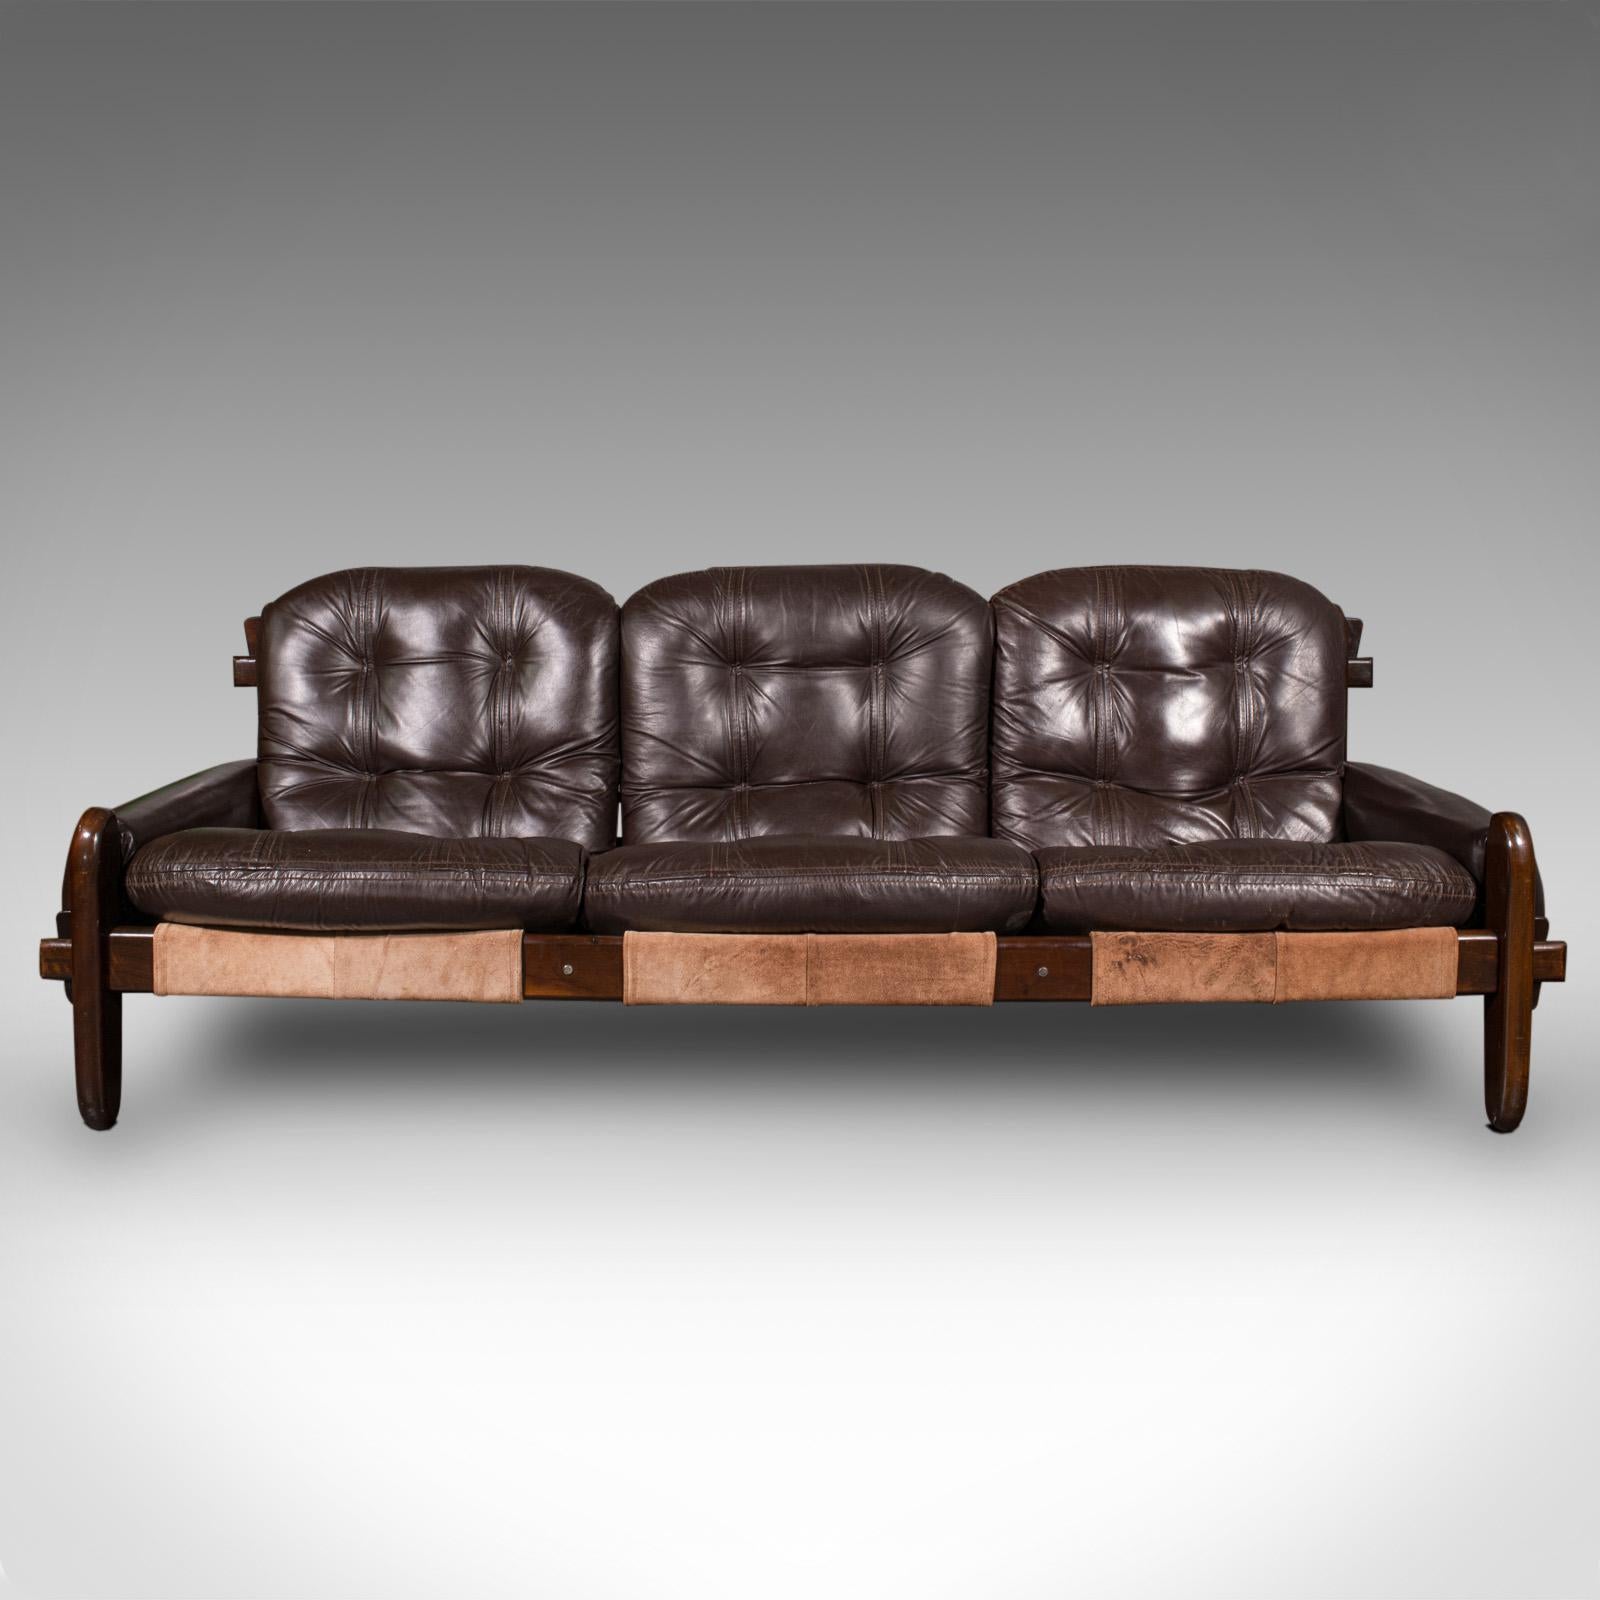 This is a large vintage 3 seat sofa. A Brazilian, leather and Imbuia lounge settee designed by Jean Gillon for Probel, dating to the mid 20th century, circa 1970.

Exceptional mid-20th century lounge sofa, graced with designer appeal and superb